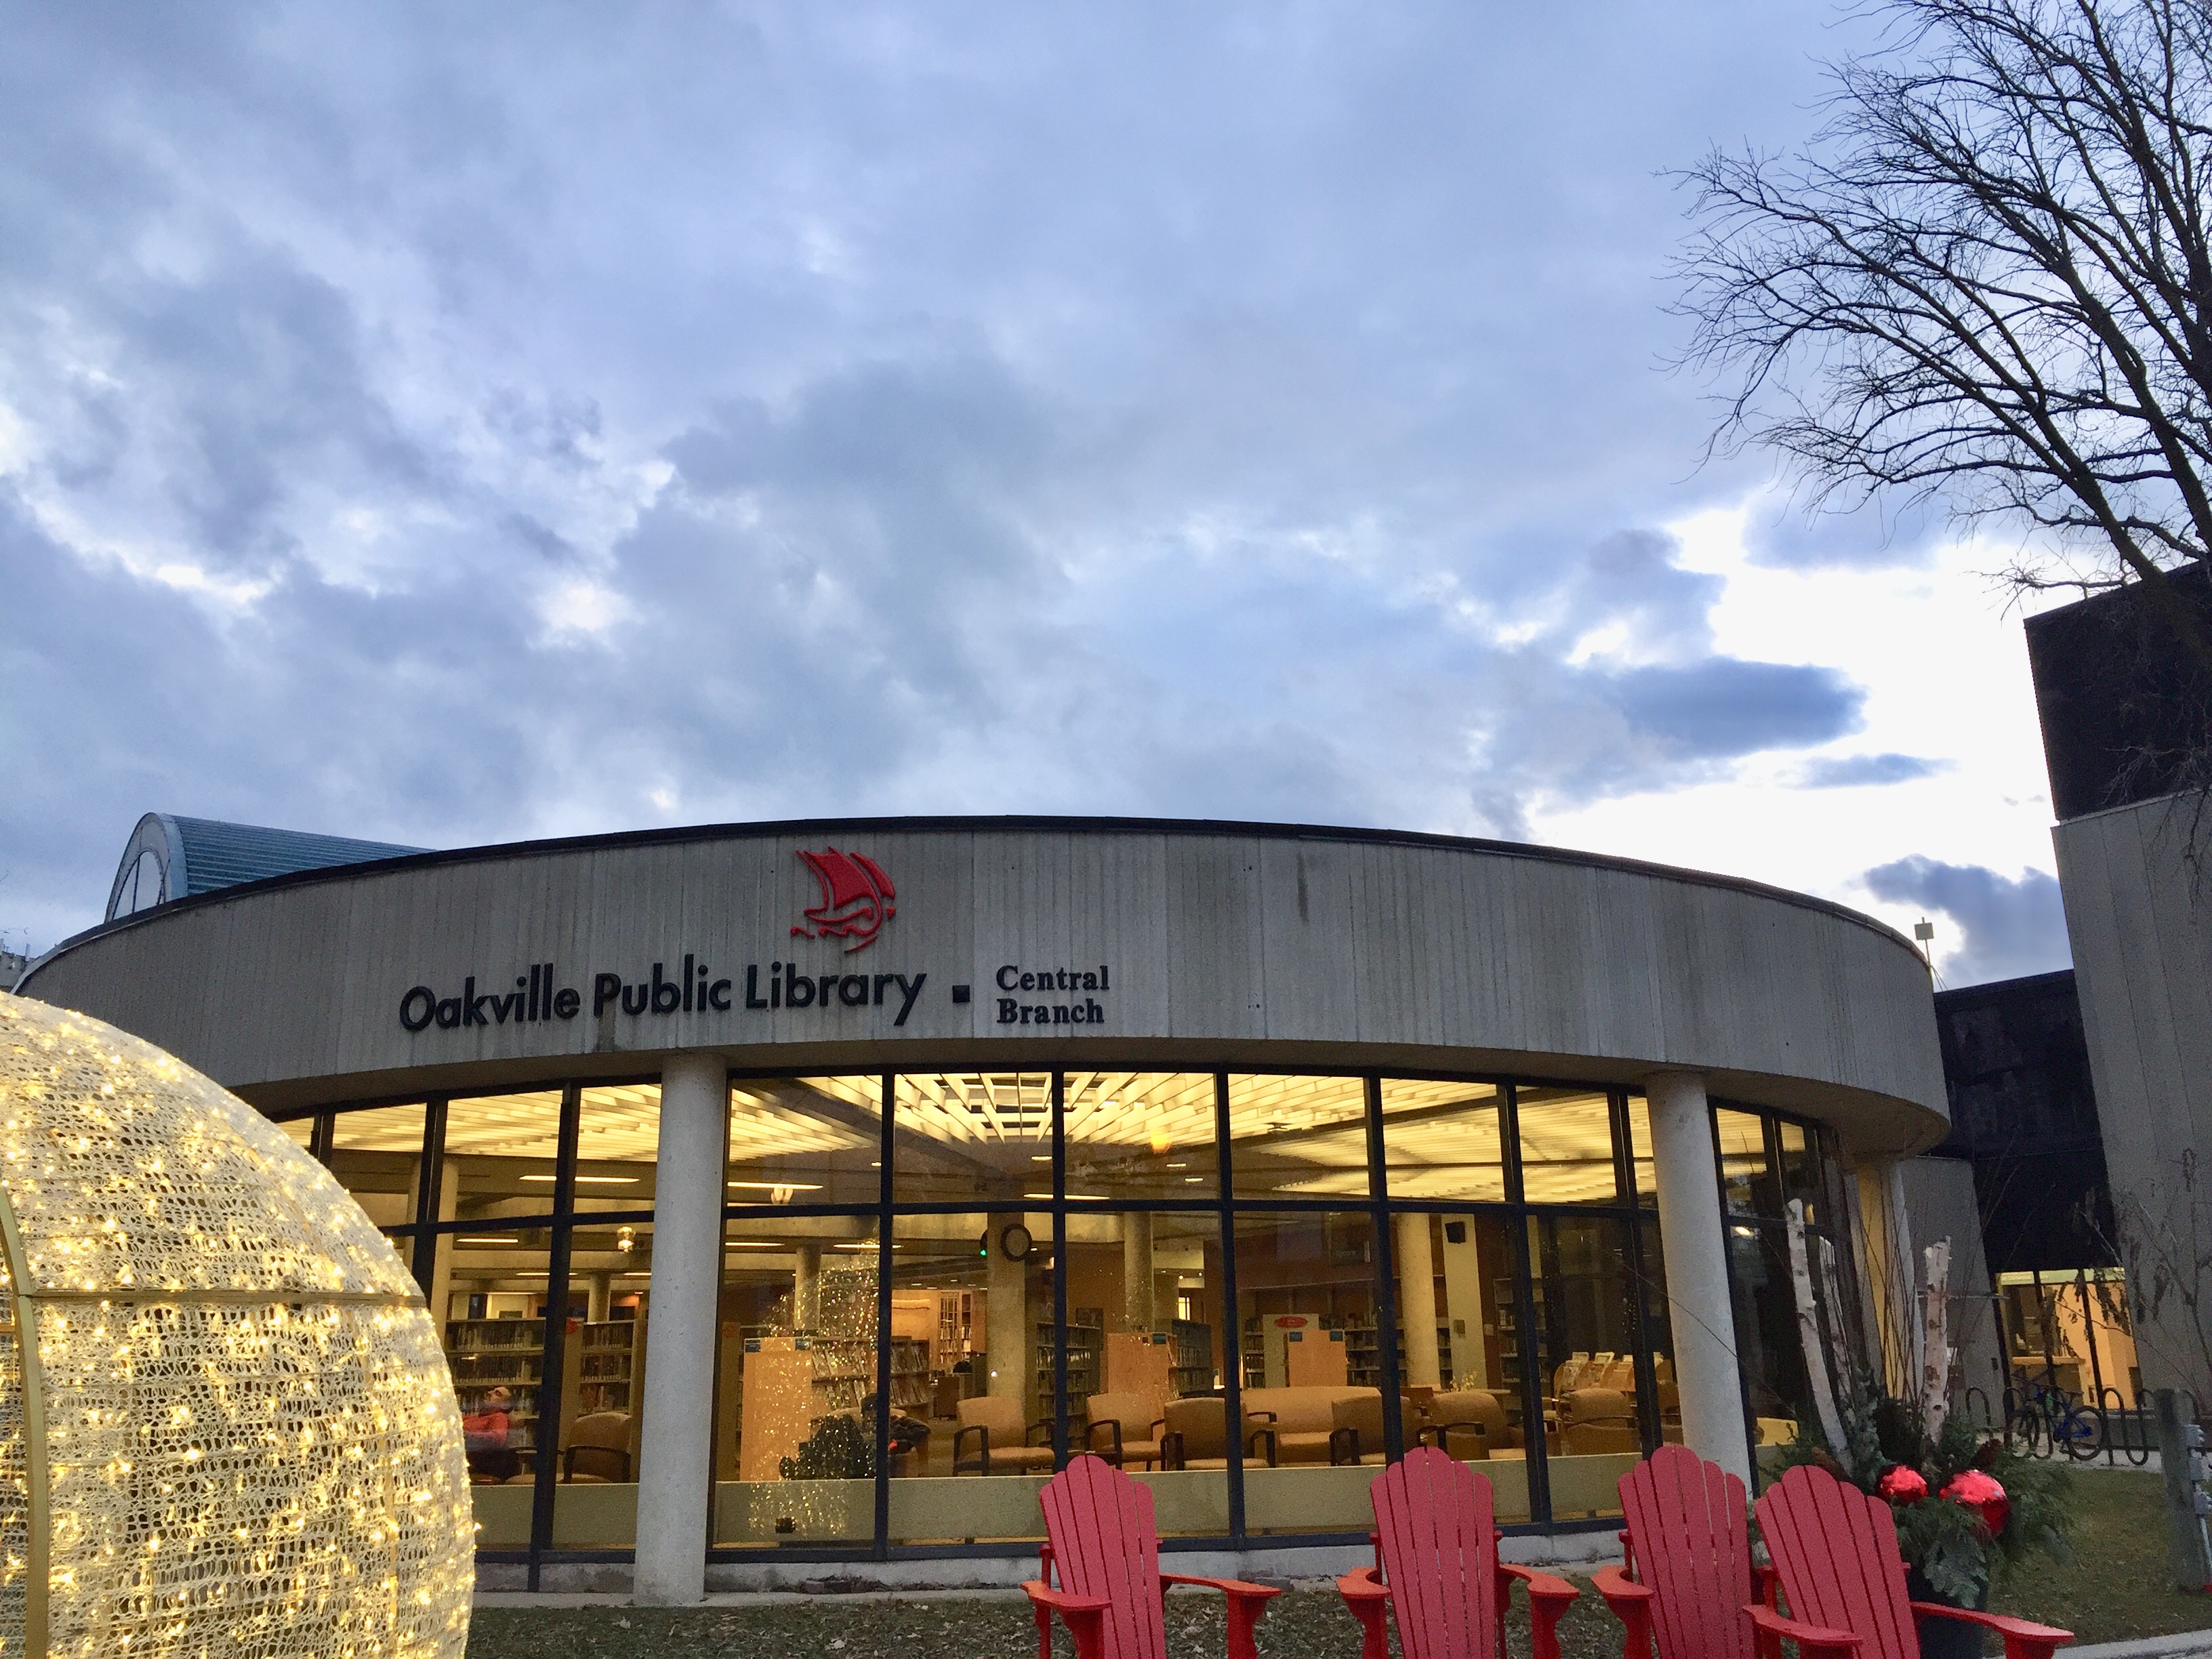 The entrance of the Central Branch of the Oakville Public Library